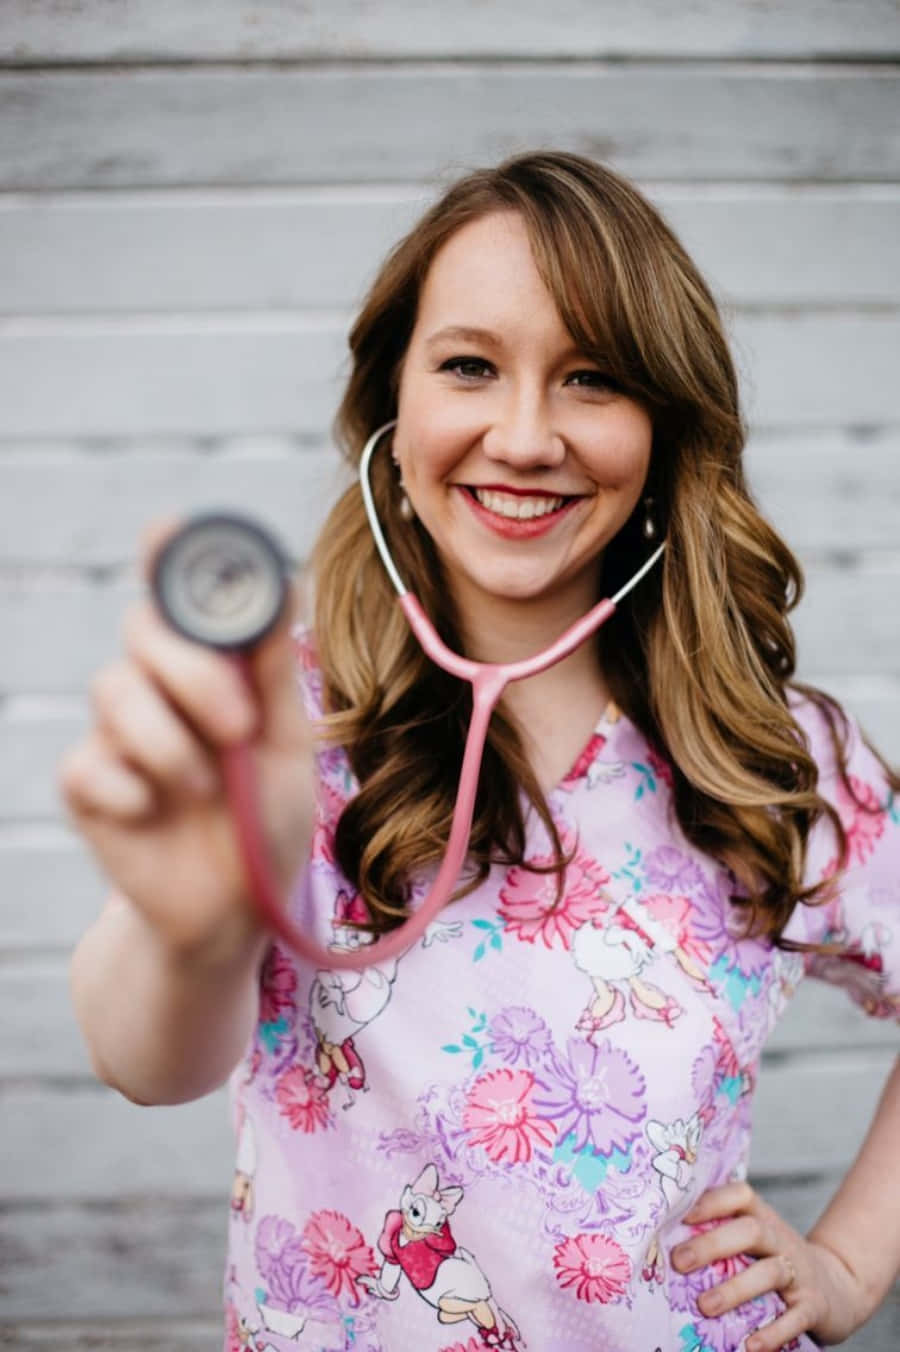 A Woman In A Pink Scrub Top Holding A Stethoscope